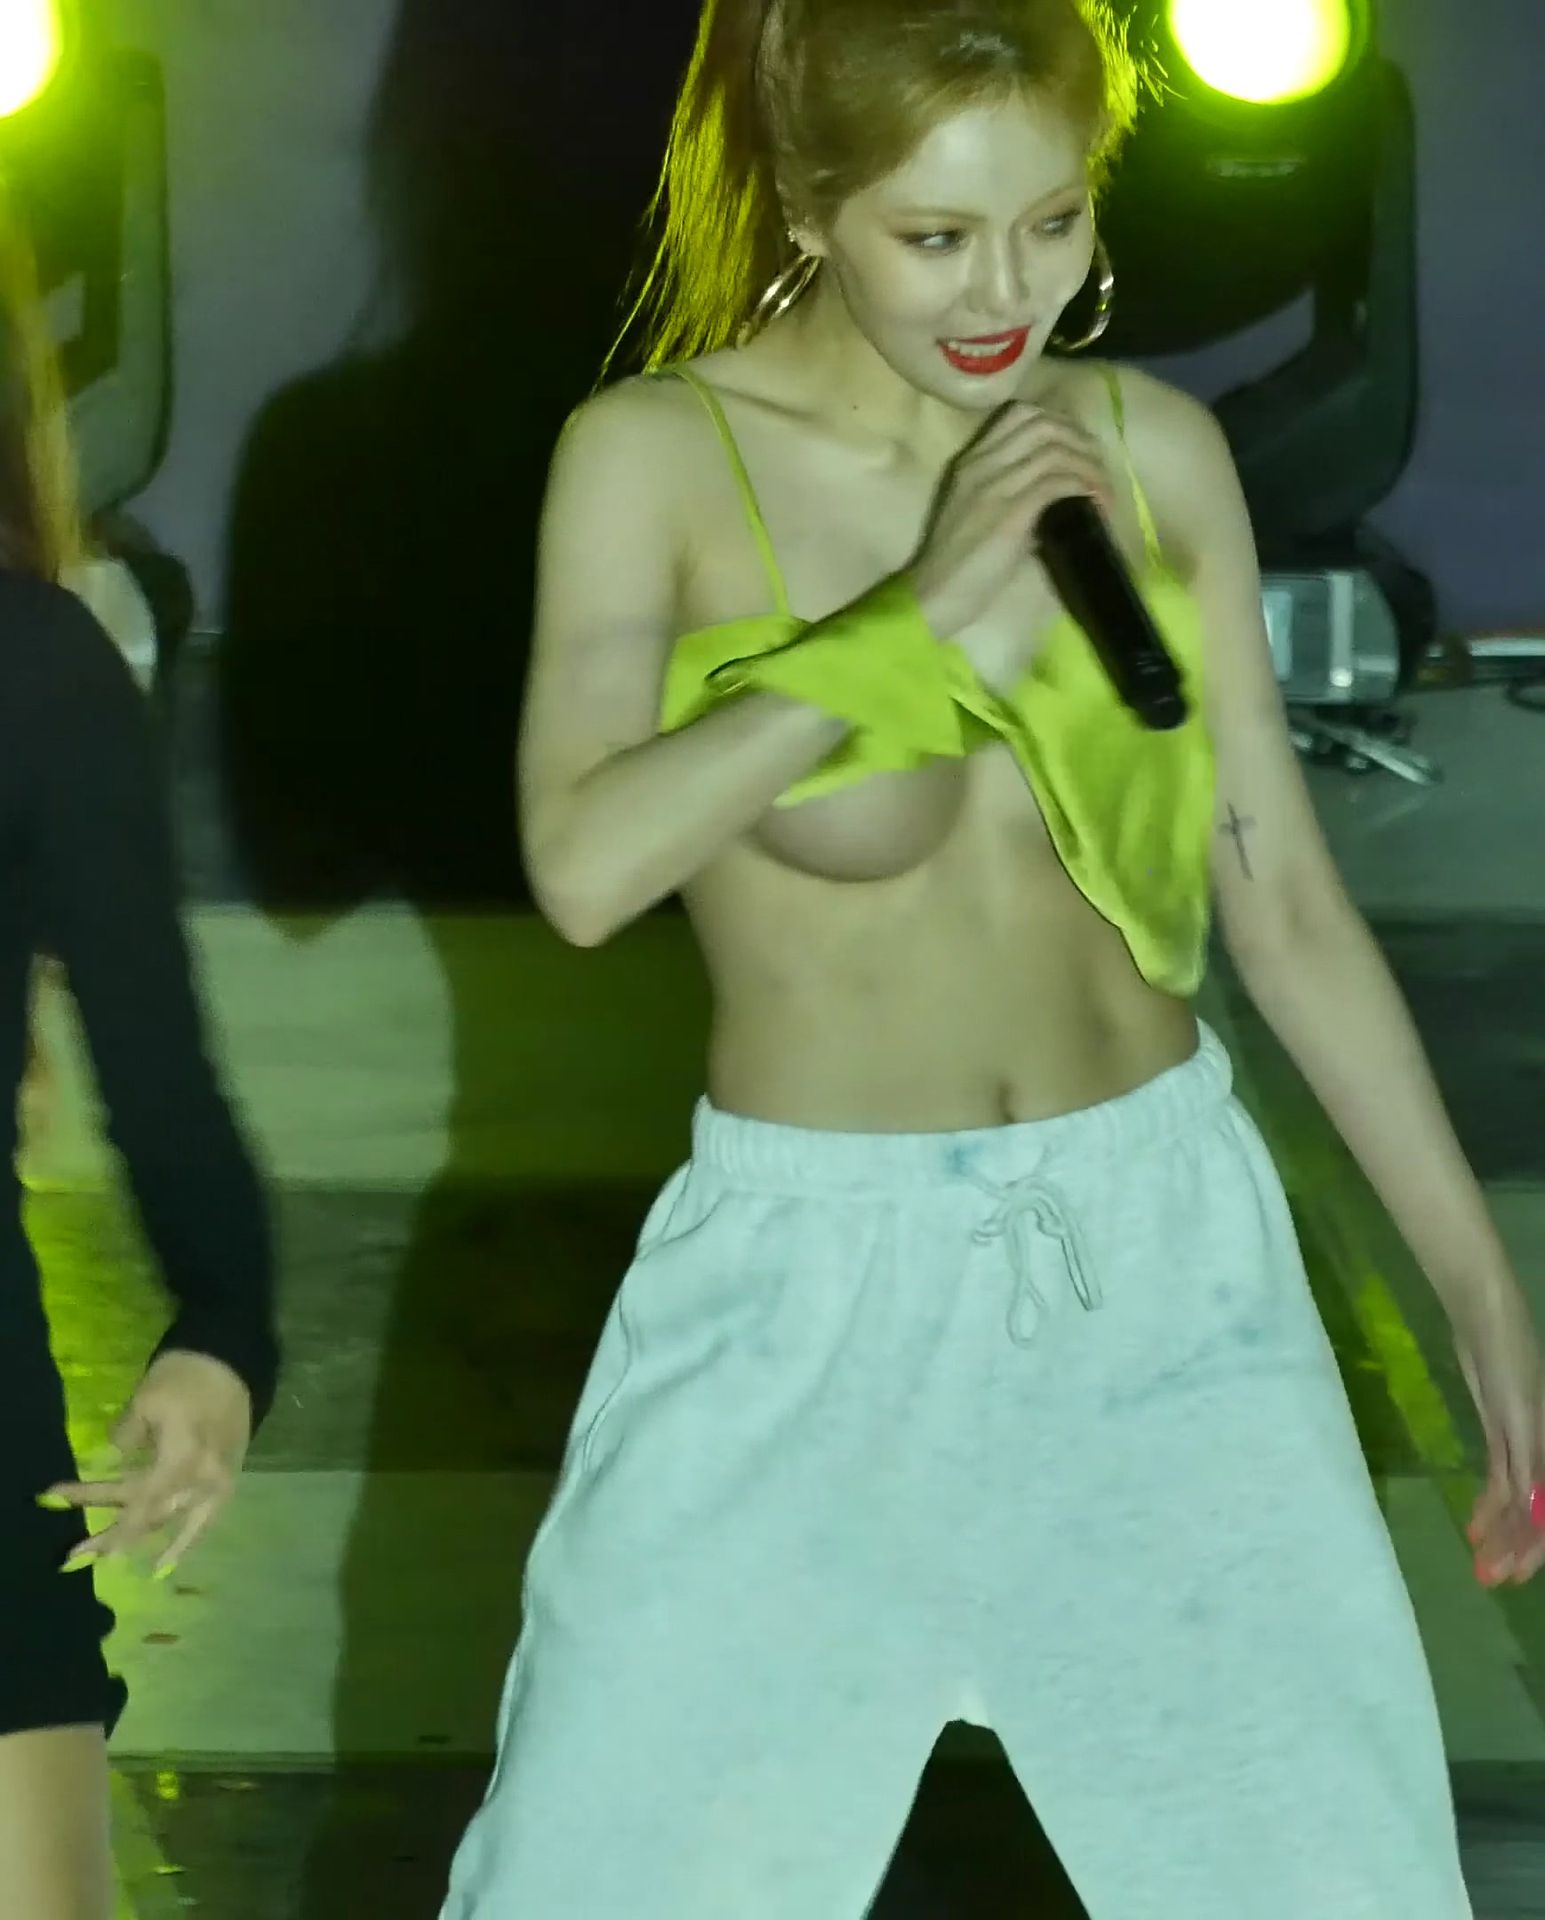 Sex Hyuna Singer porn images hyunas hot collection photos gifs thefappening...